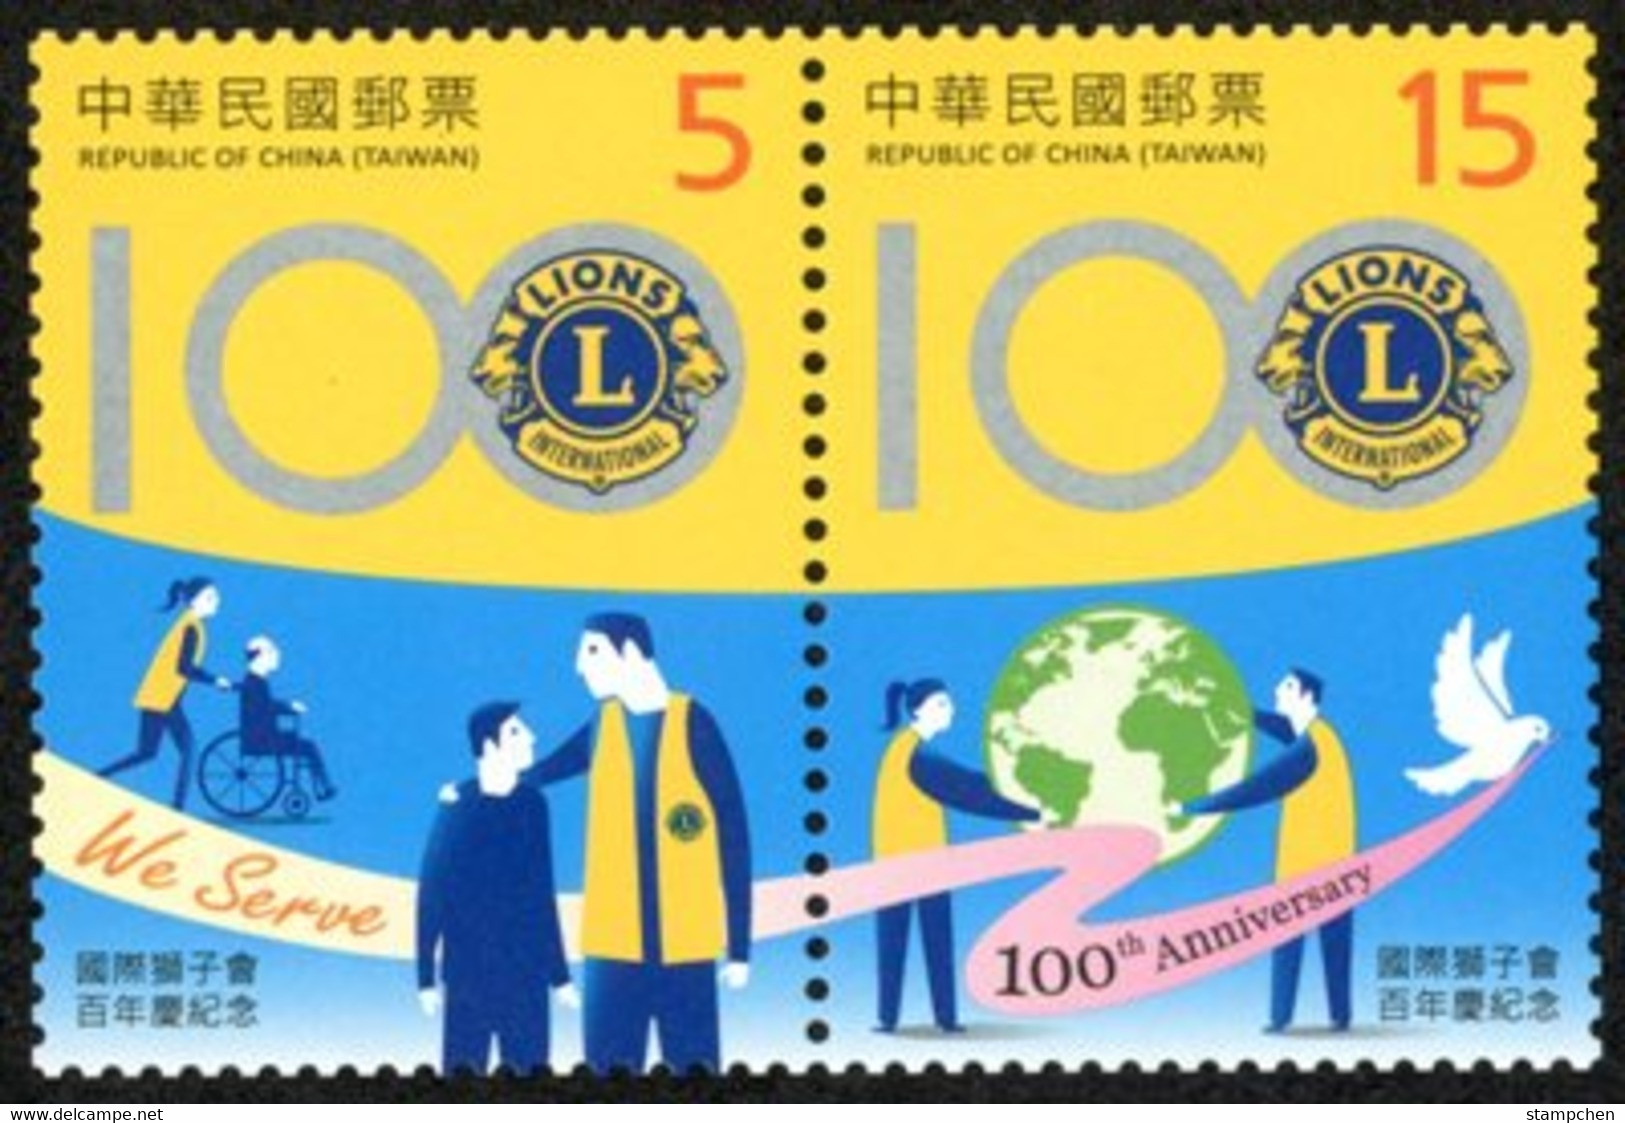 2017 Lions Clubs International Centennial Stamps Wheelchair Elder Youth Globe Map - Geography